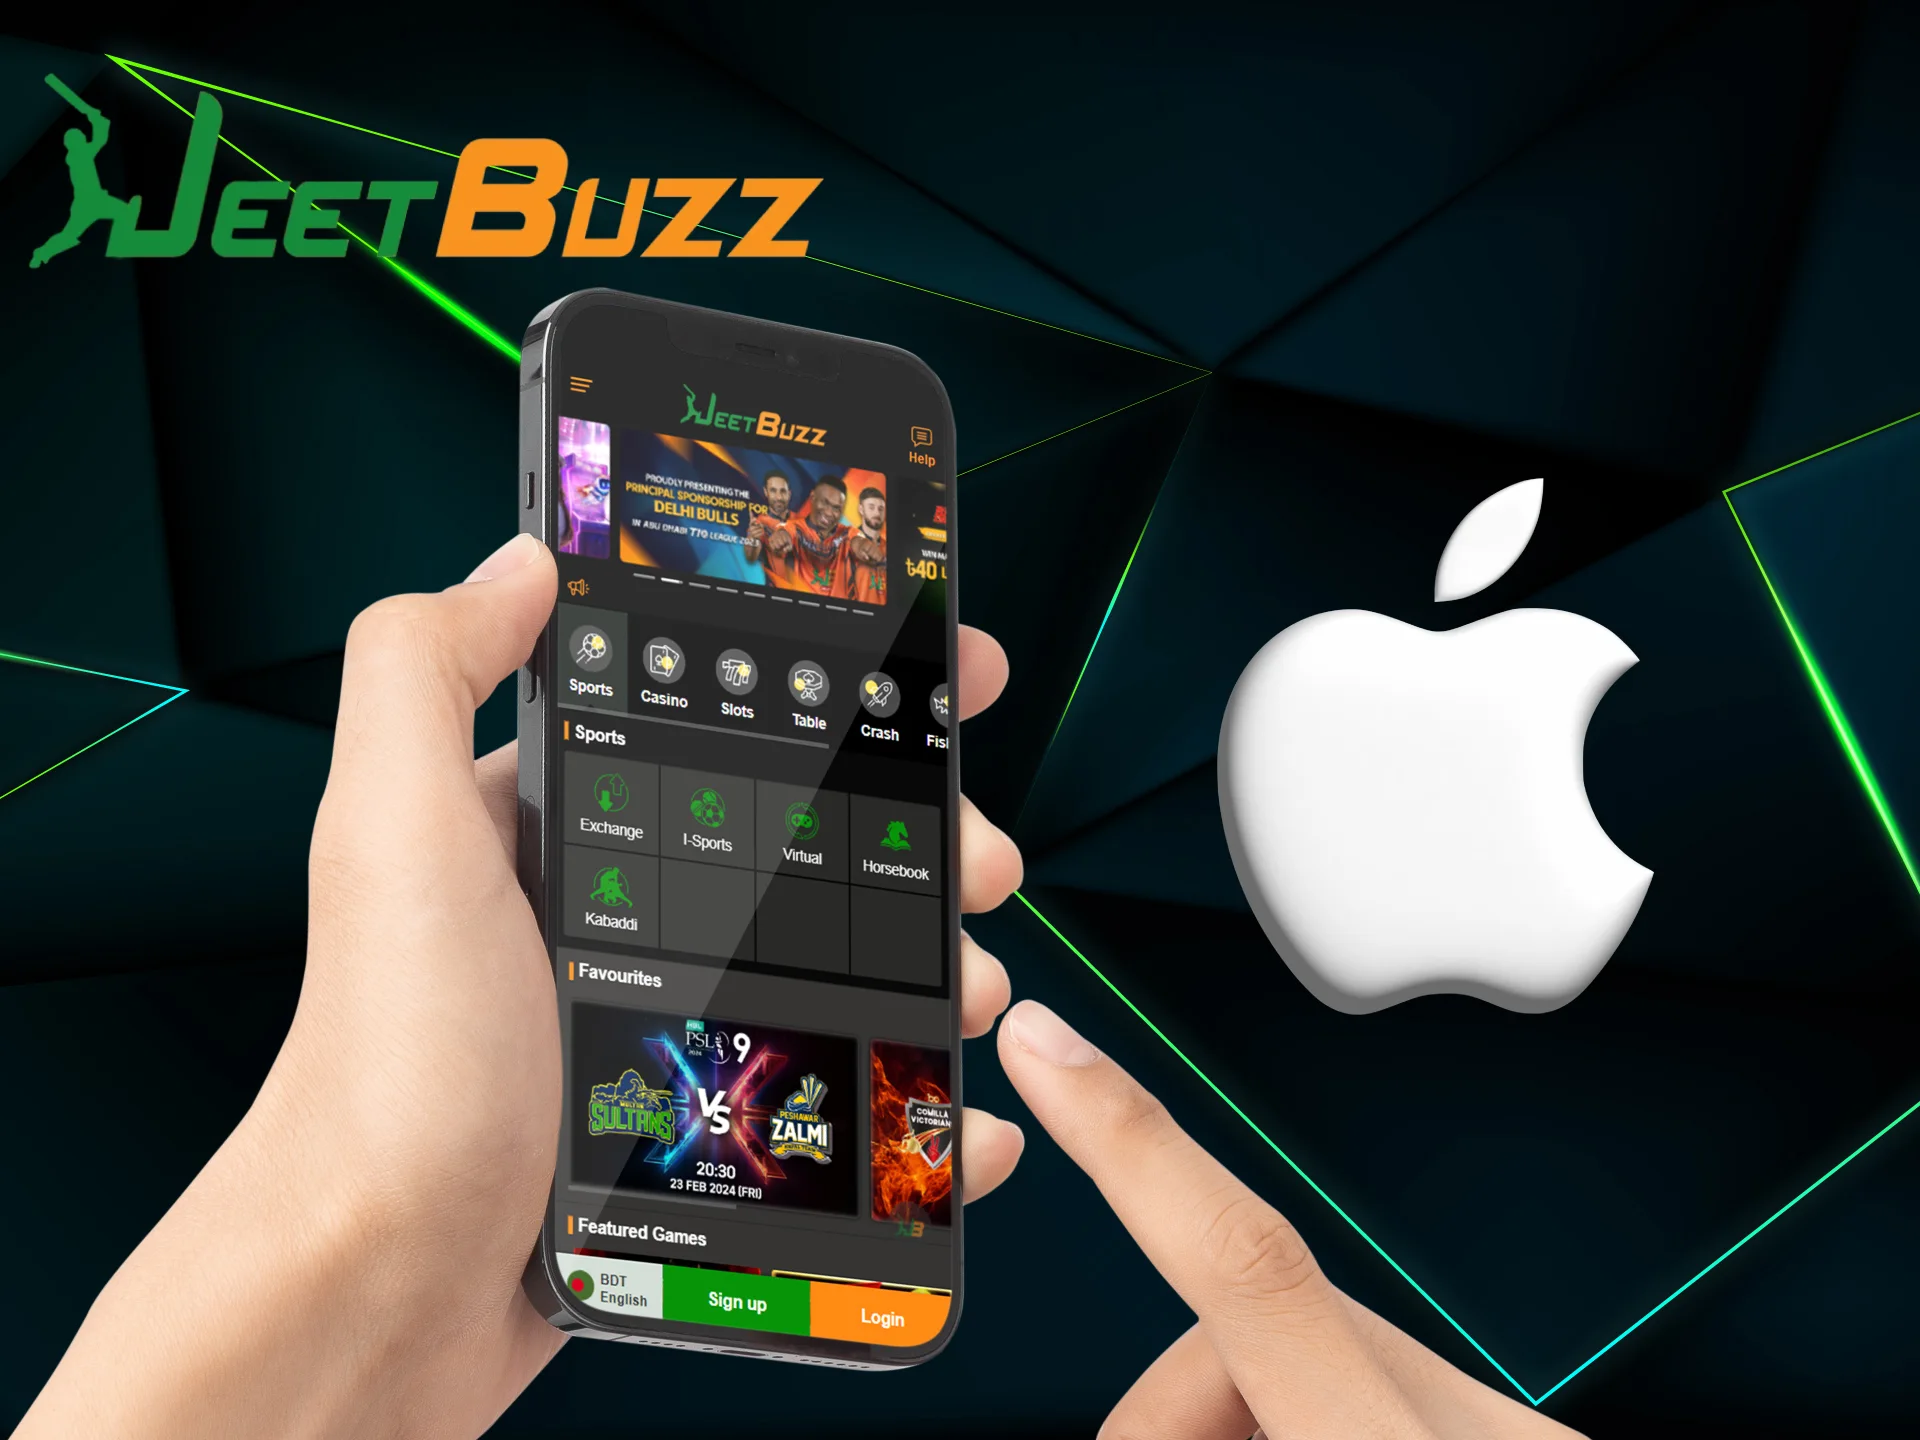 The iOS app is in development, but you can use the browser version of JeetBuzz.